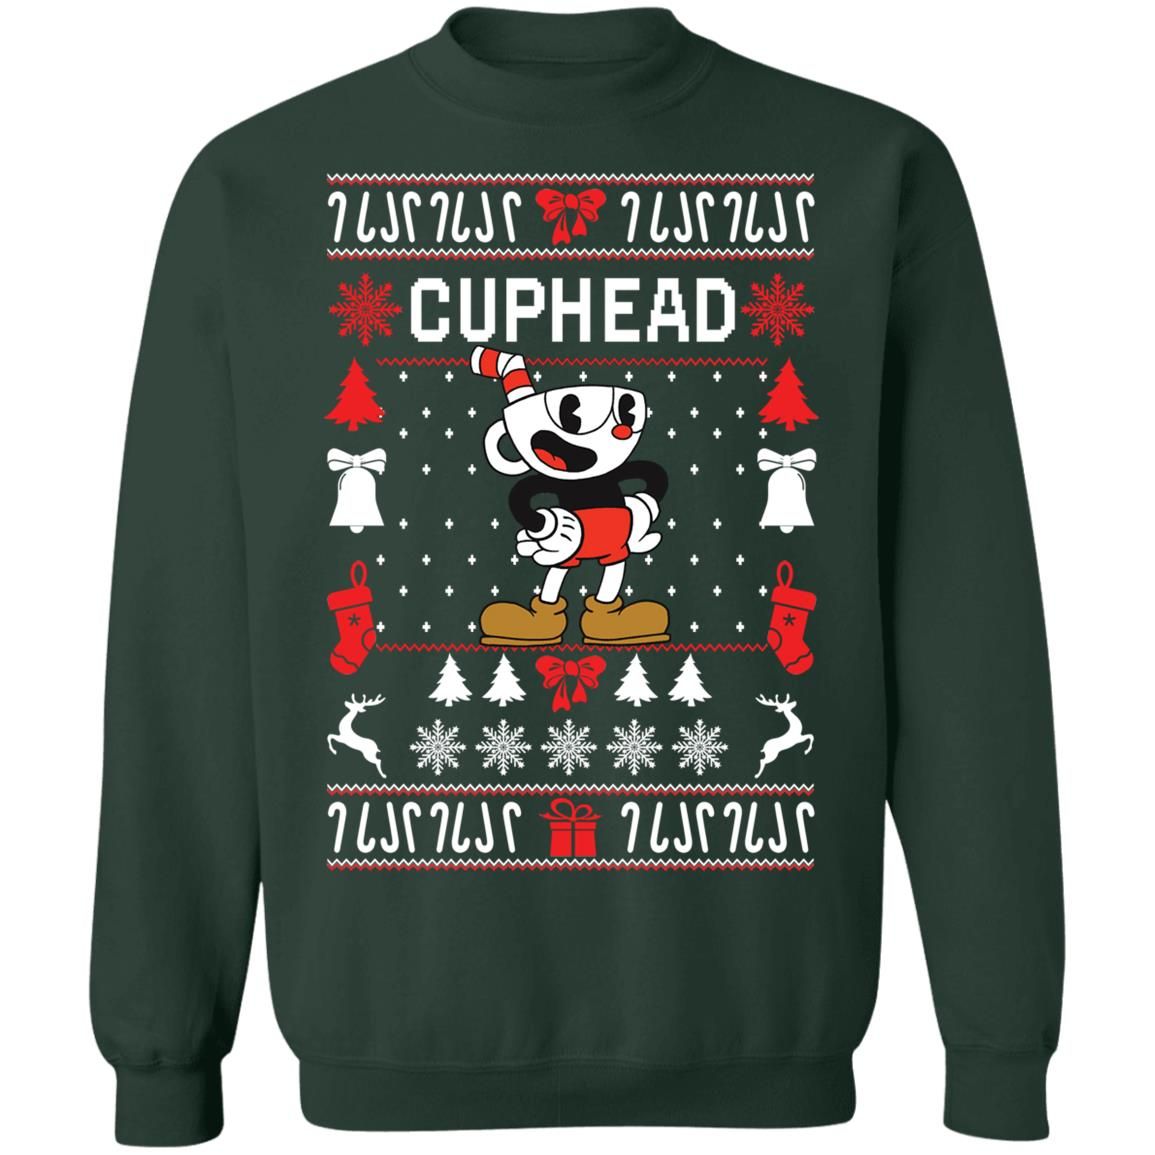 Cuphead Christmas sweater Christmas tree snowflakes Cute Cup Sweatshirt Forest Green S